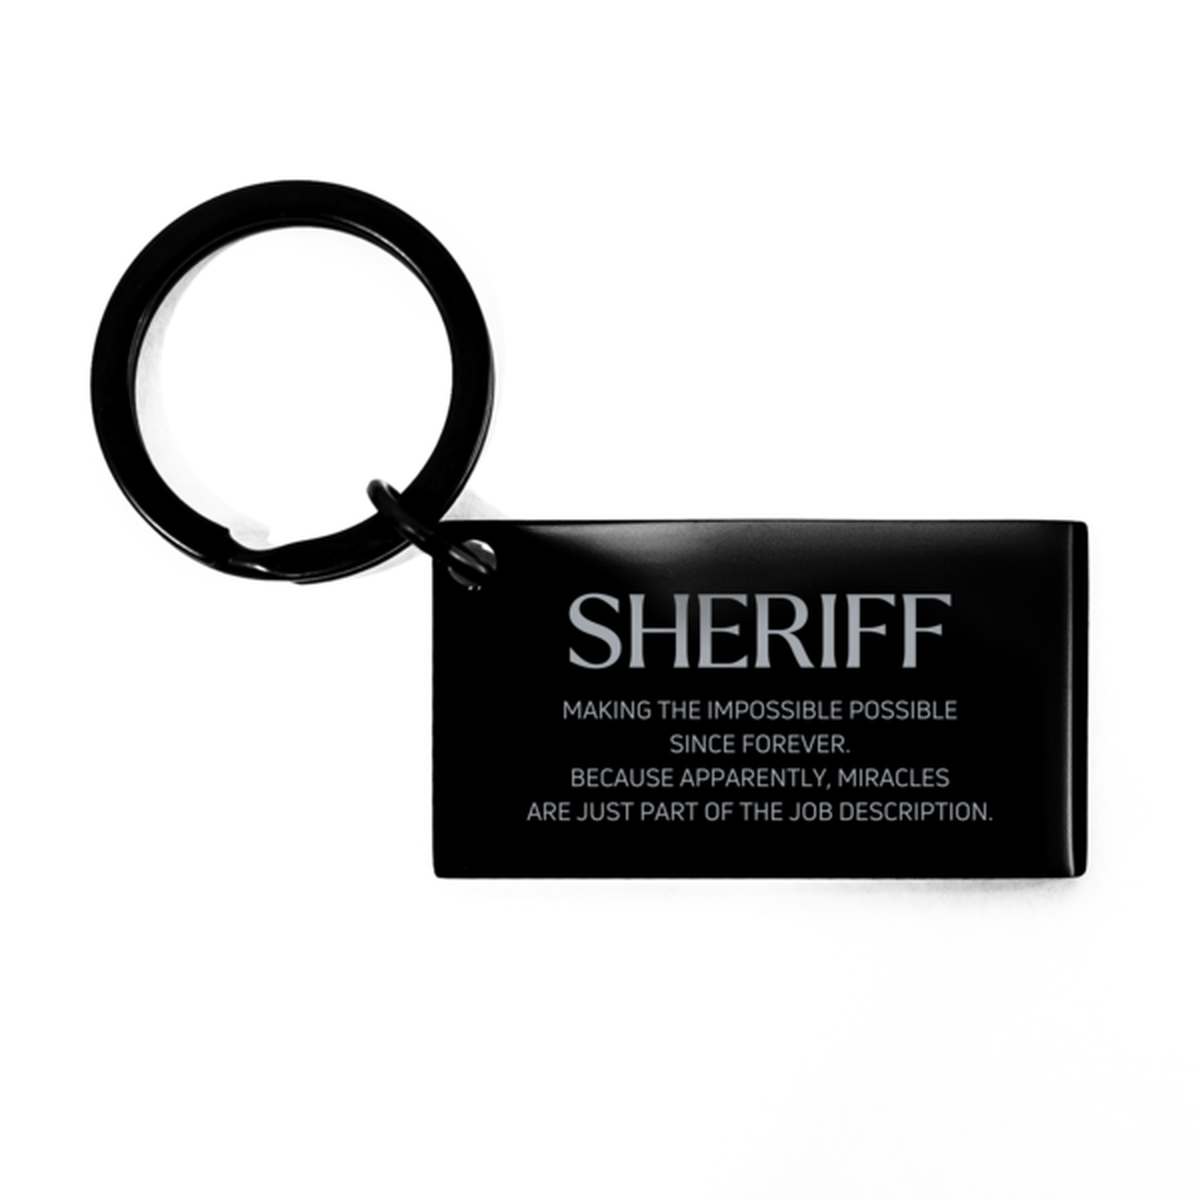 Funny Sheriff Gifts, Miracles are just part of the job description, Inspirational Birthday Keychain For Sheriff, Men, Women, Coworkers, Friends, Boss